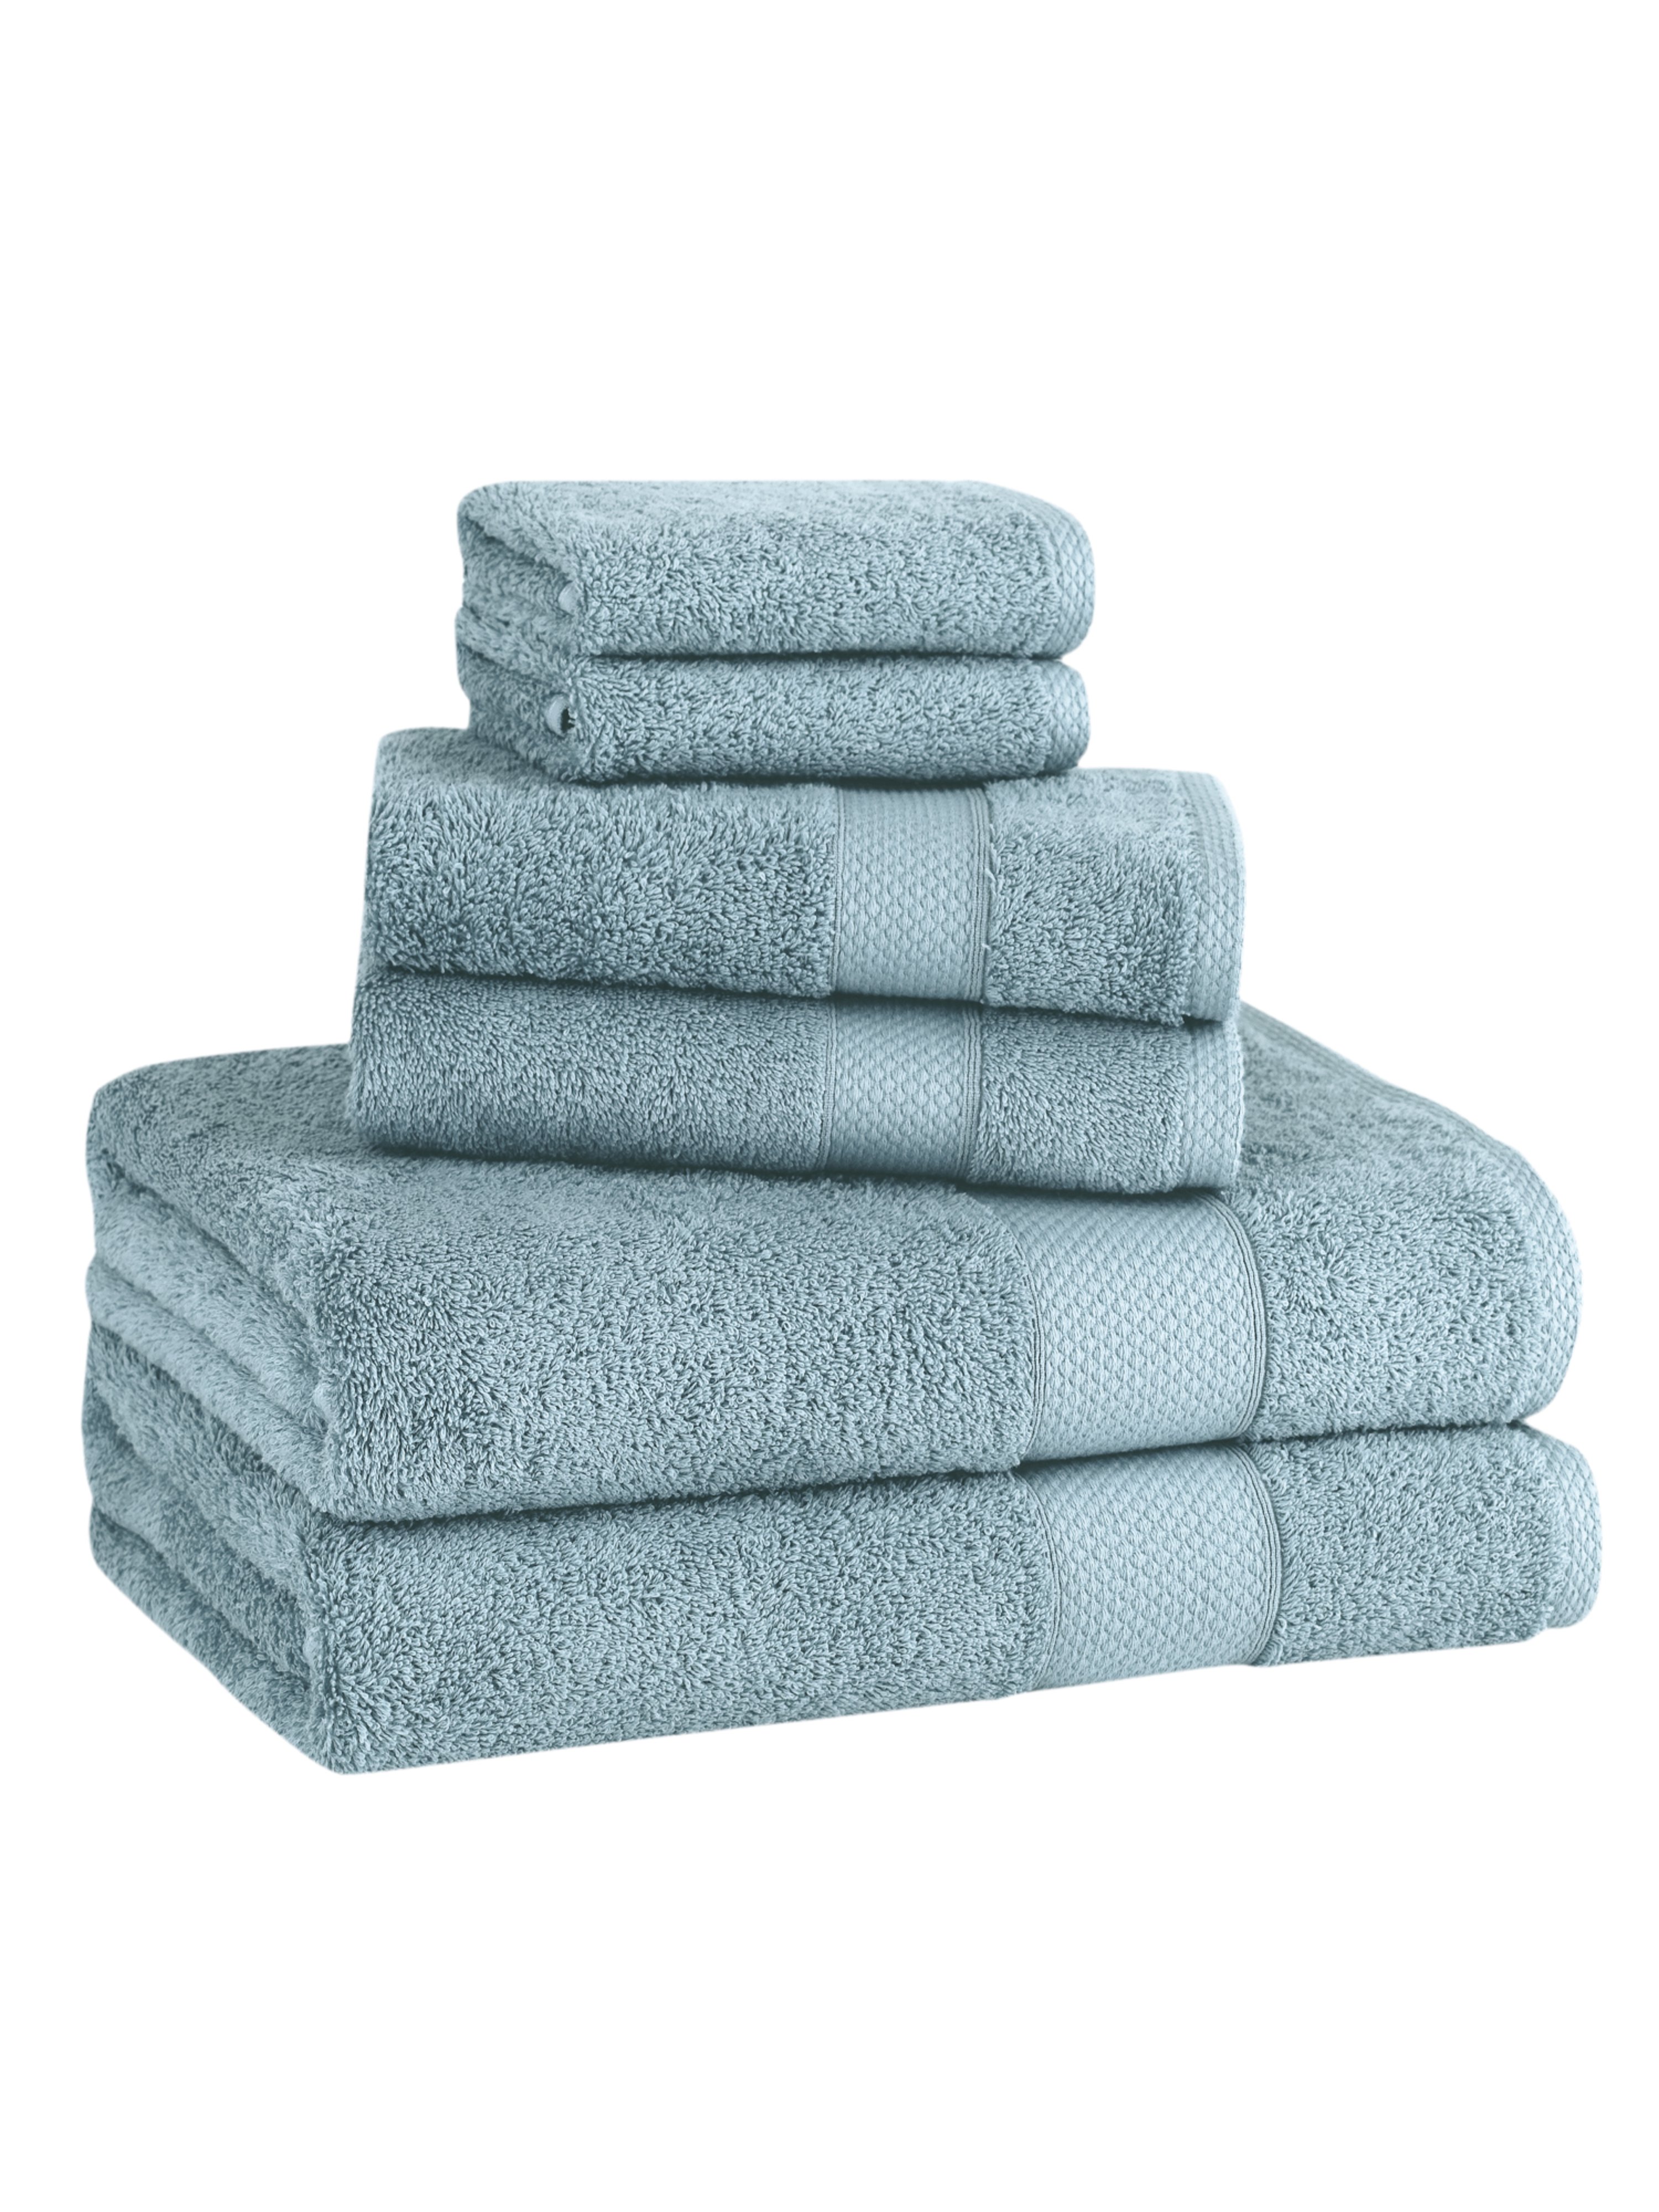 Classic Turkish Towels Madison Towel Collection In Blue